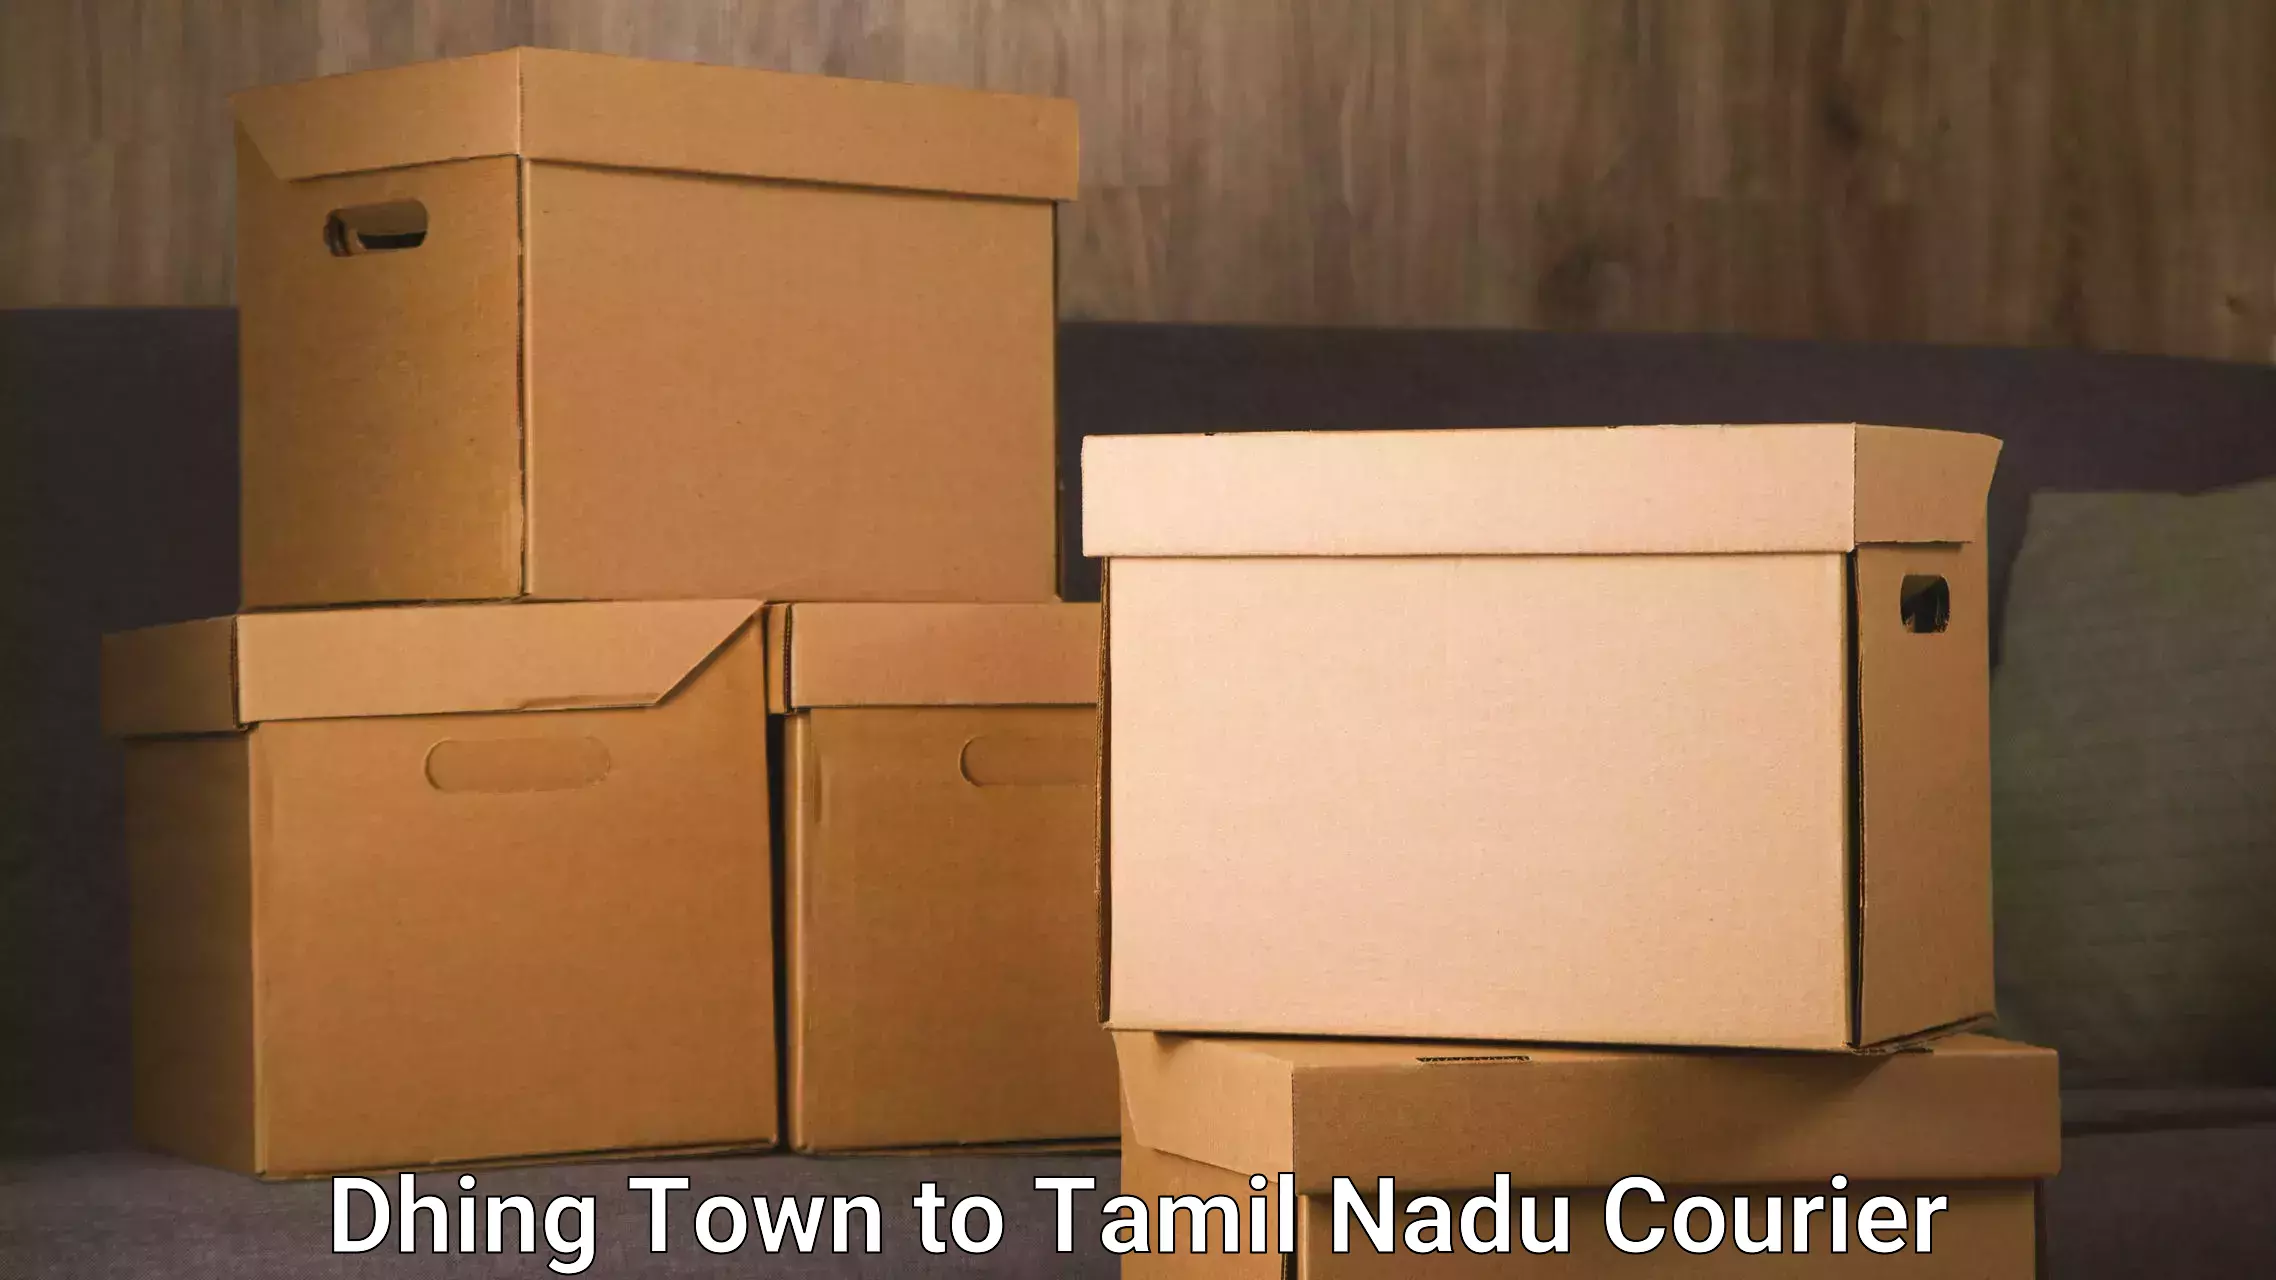 24/7 courier service Dhing Town to Ambattur